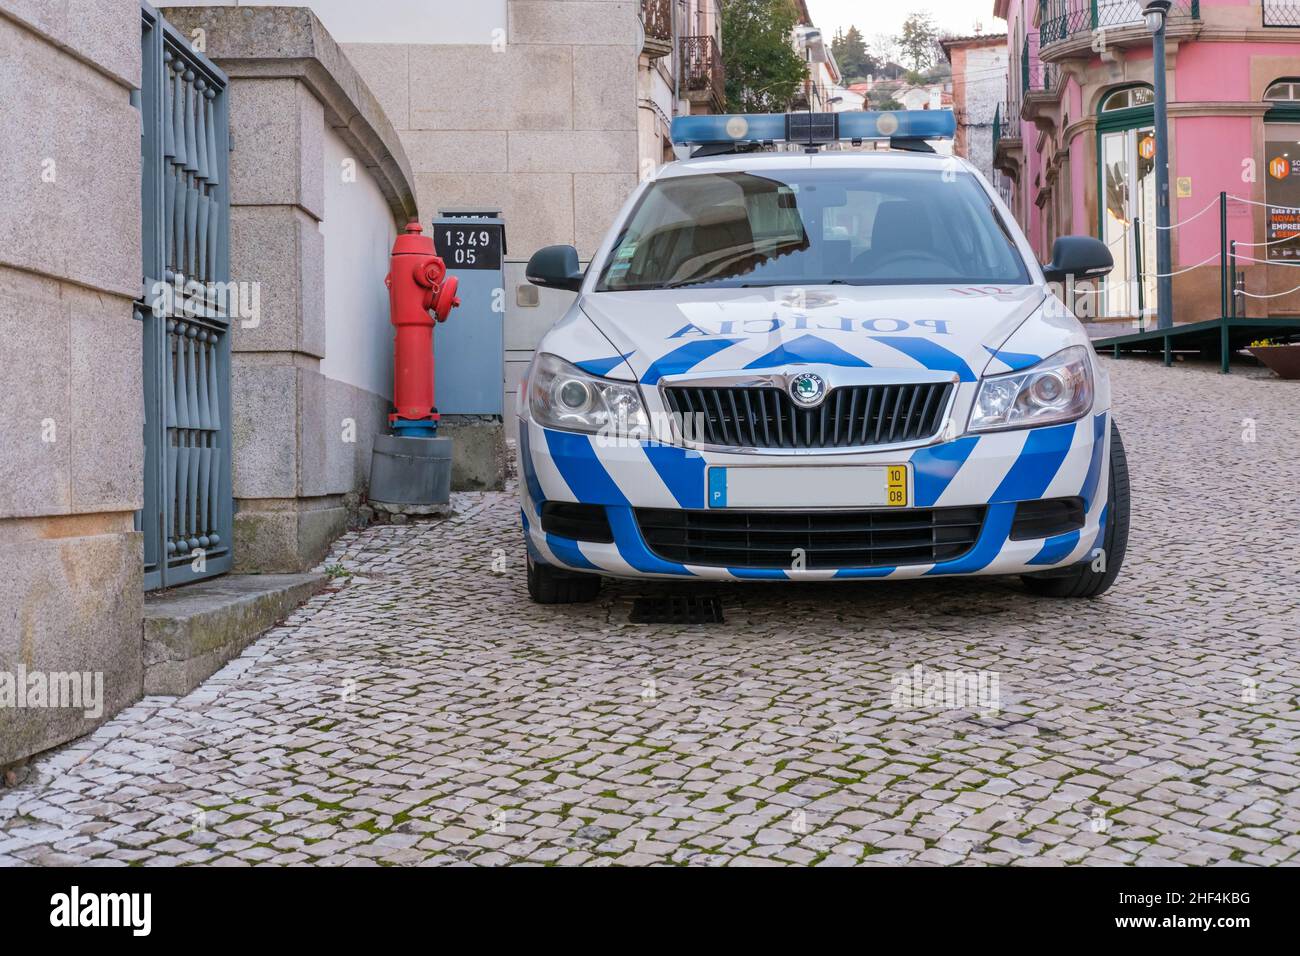 Castelo Branco, Portugal - January 13 2022: Police car parked illegally blocking a fire hydrant on a street in Castelo Branco Portugal Stock Photo